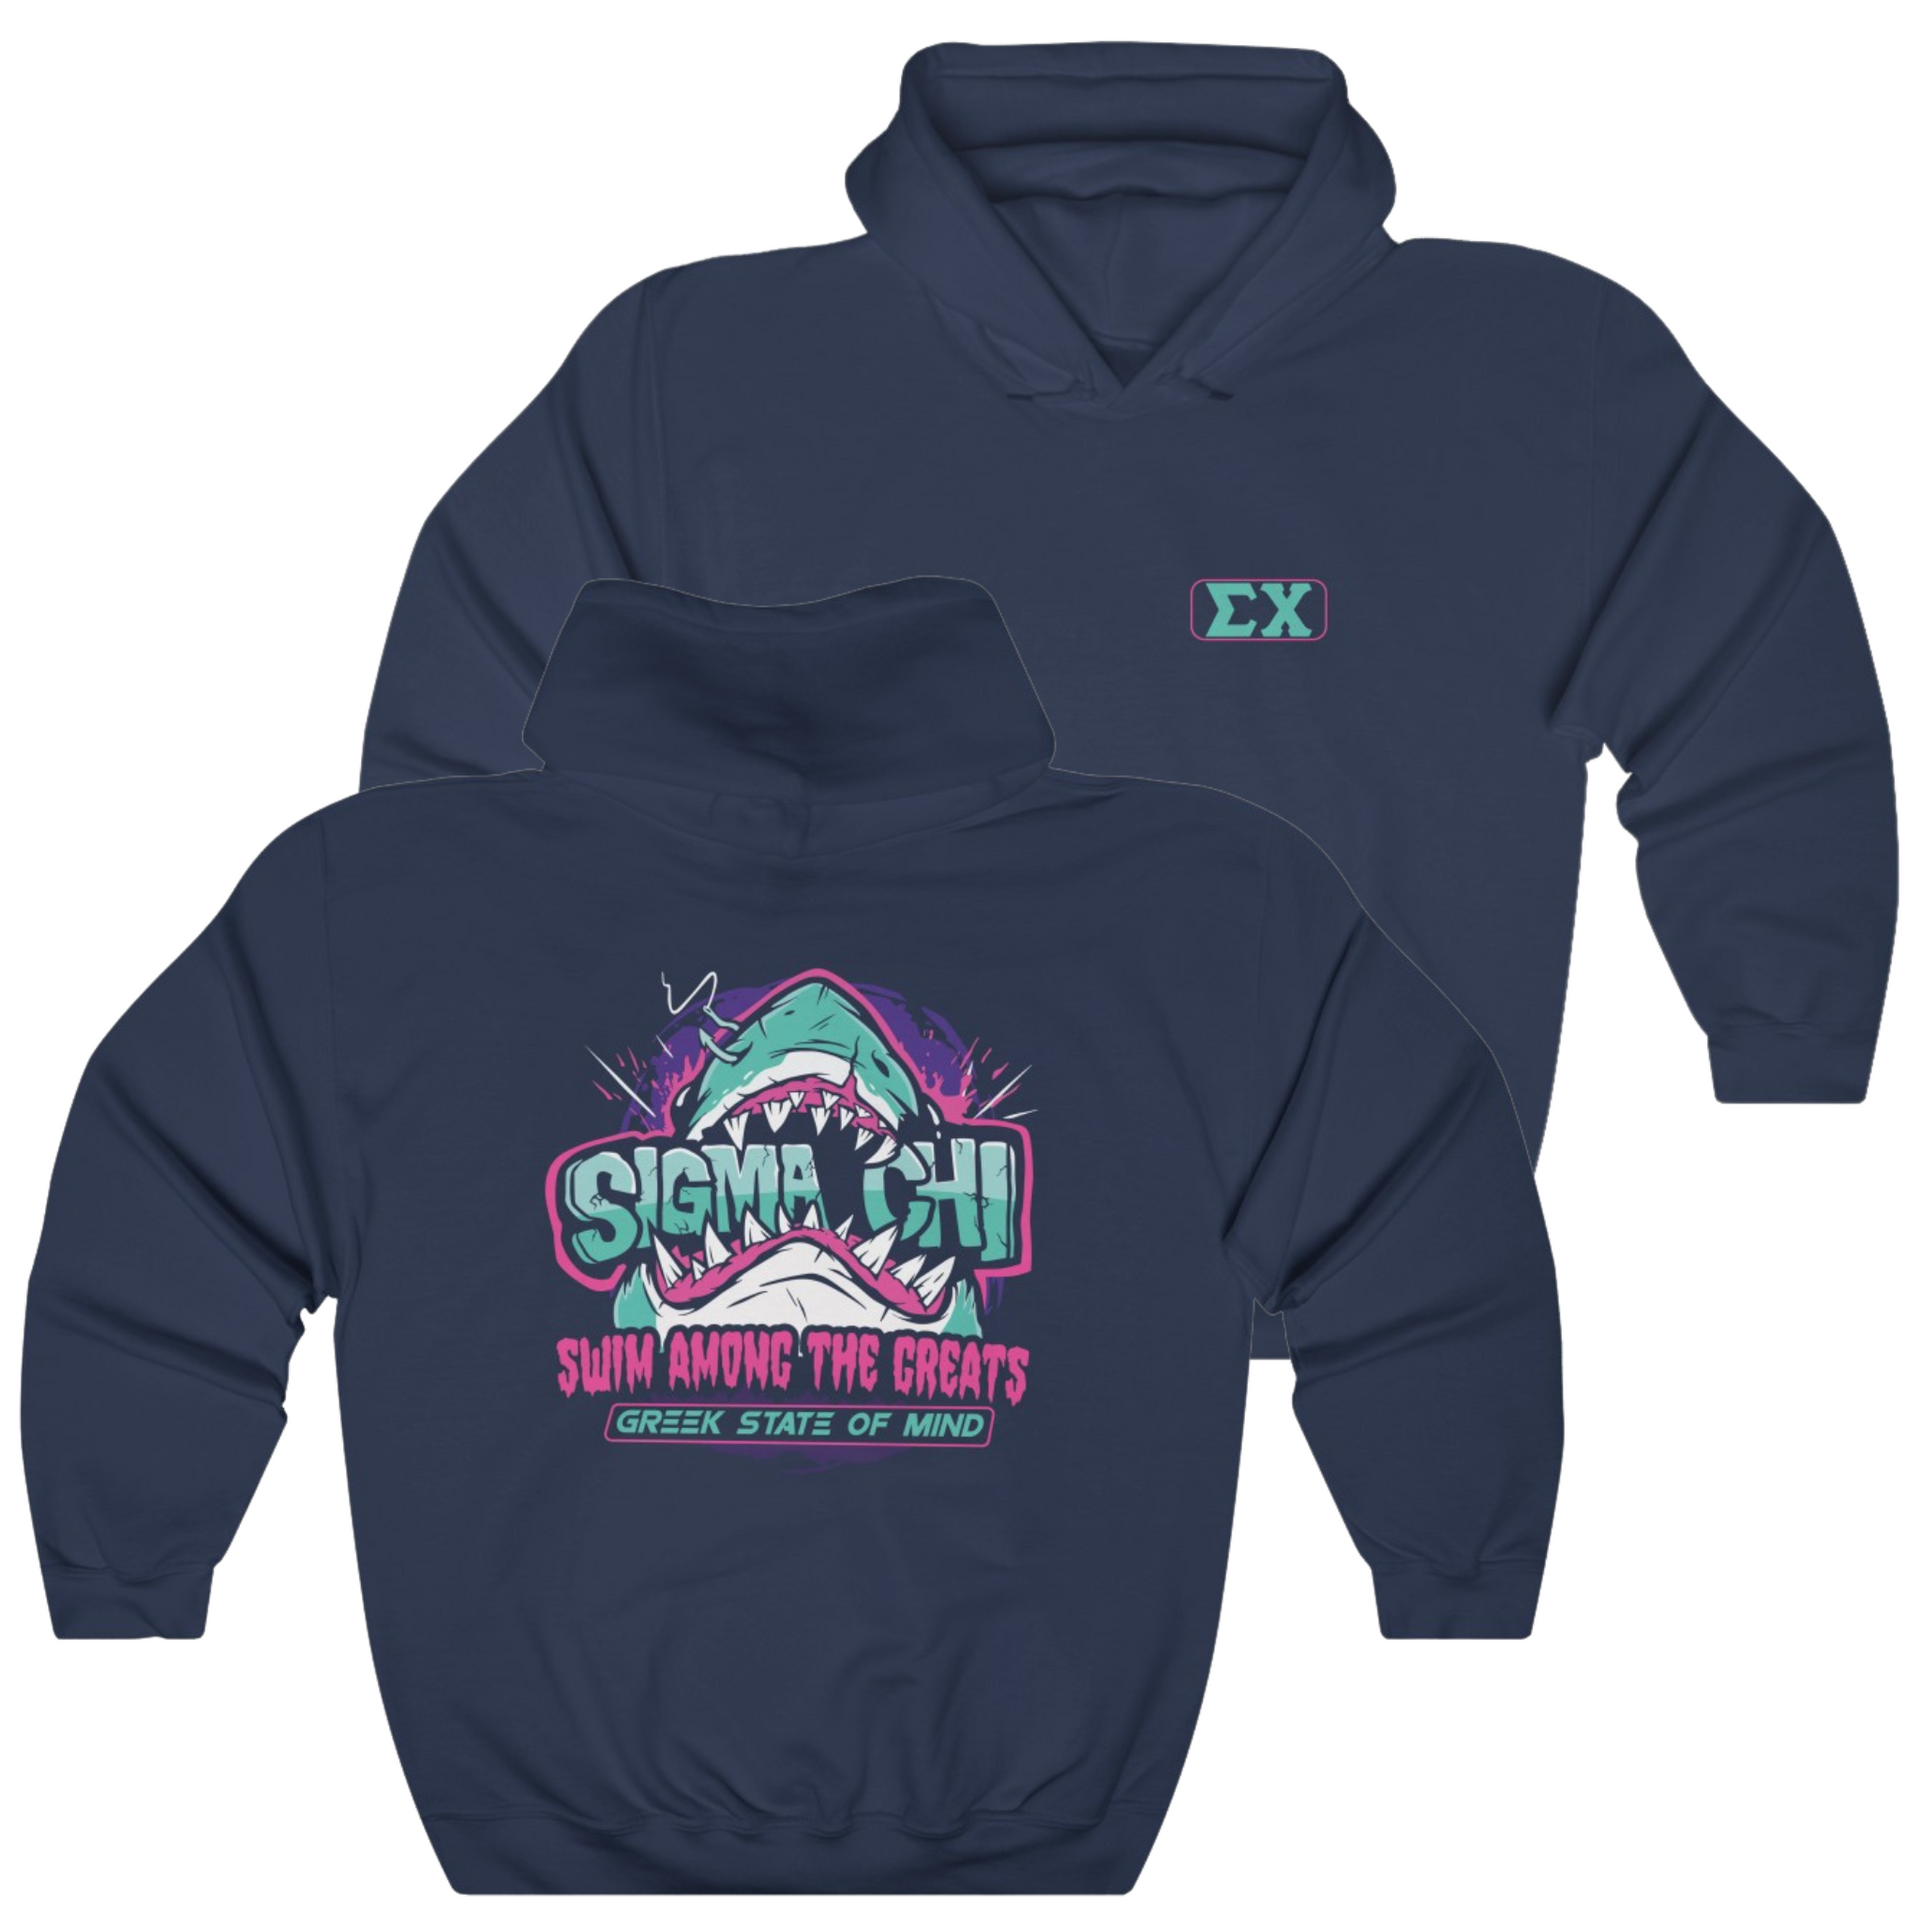 Navy Sigma Chi Graphic Hoodie | The Deep End | Sigma Chi Fraternity Merch House